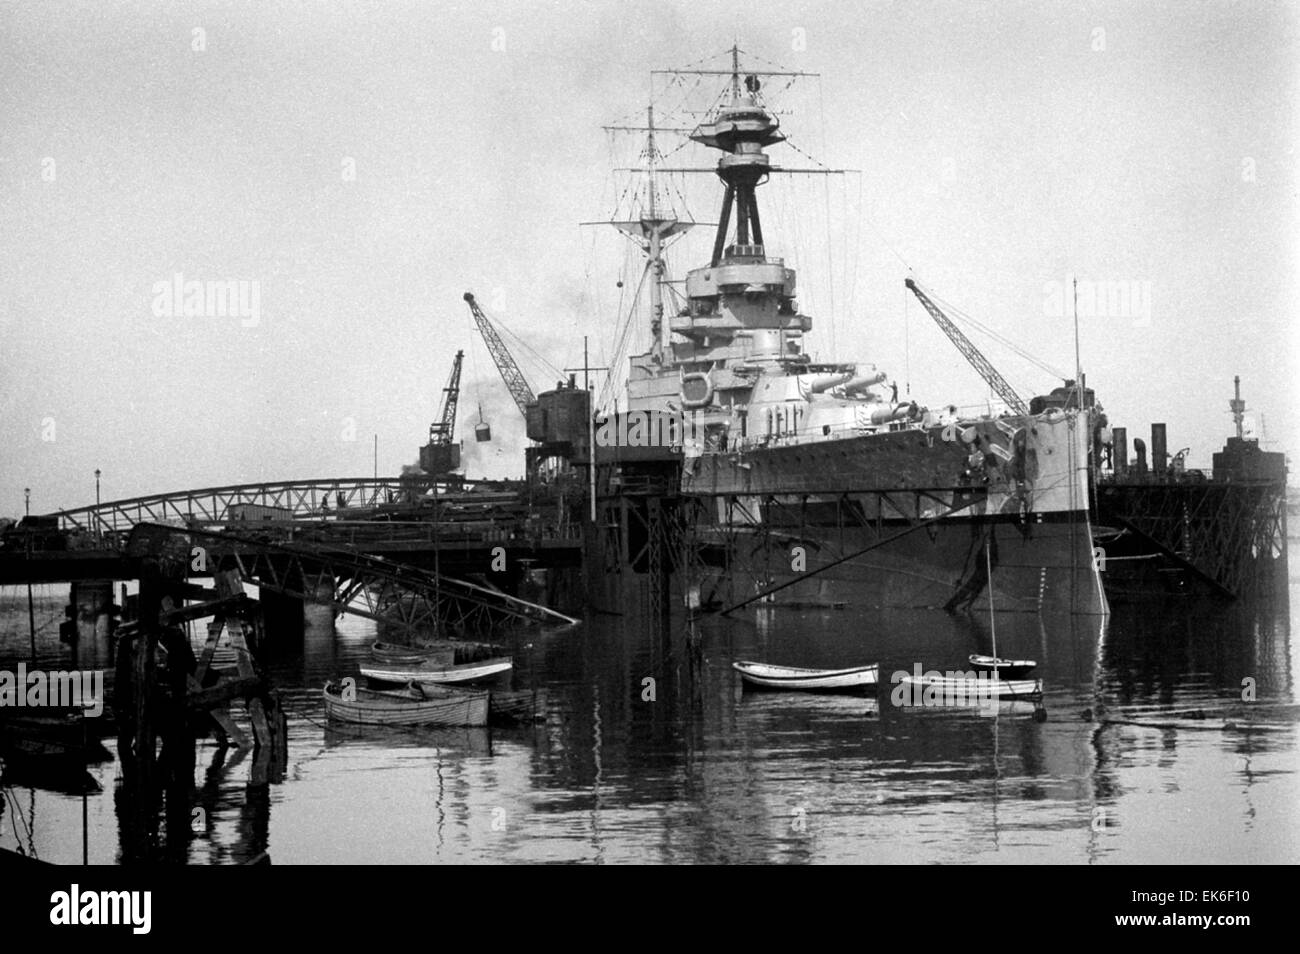 AJAXNETPHOTO. 1920-1930S. PORTSMOUTH, ENGLAND. - BATTLESHIP REFIT - A ROYAL SOVEREIGN CLASS BATTLESHIP, POSSIBLY HMS ROYAL OAK (SUNK 10/1939) OR HMS REVENGE, IN THE HUGE FLOATING DOCK LOCATED NR FLATHOUSE QUAY. NOTE THE LINKSPAN CONNECTING THE DOCK TO FOUNTAIN LAKE JETTY. SISTER SHIP ROYAL SOVEREIGN WAS BUILT IN PORTSMOUTH.  PHOTO:AJAX VINTAGE PICTURE LIBRARY REF:()AVL Stock Photo